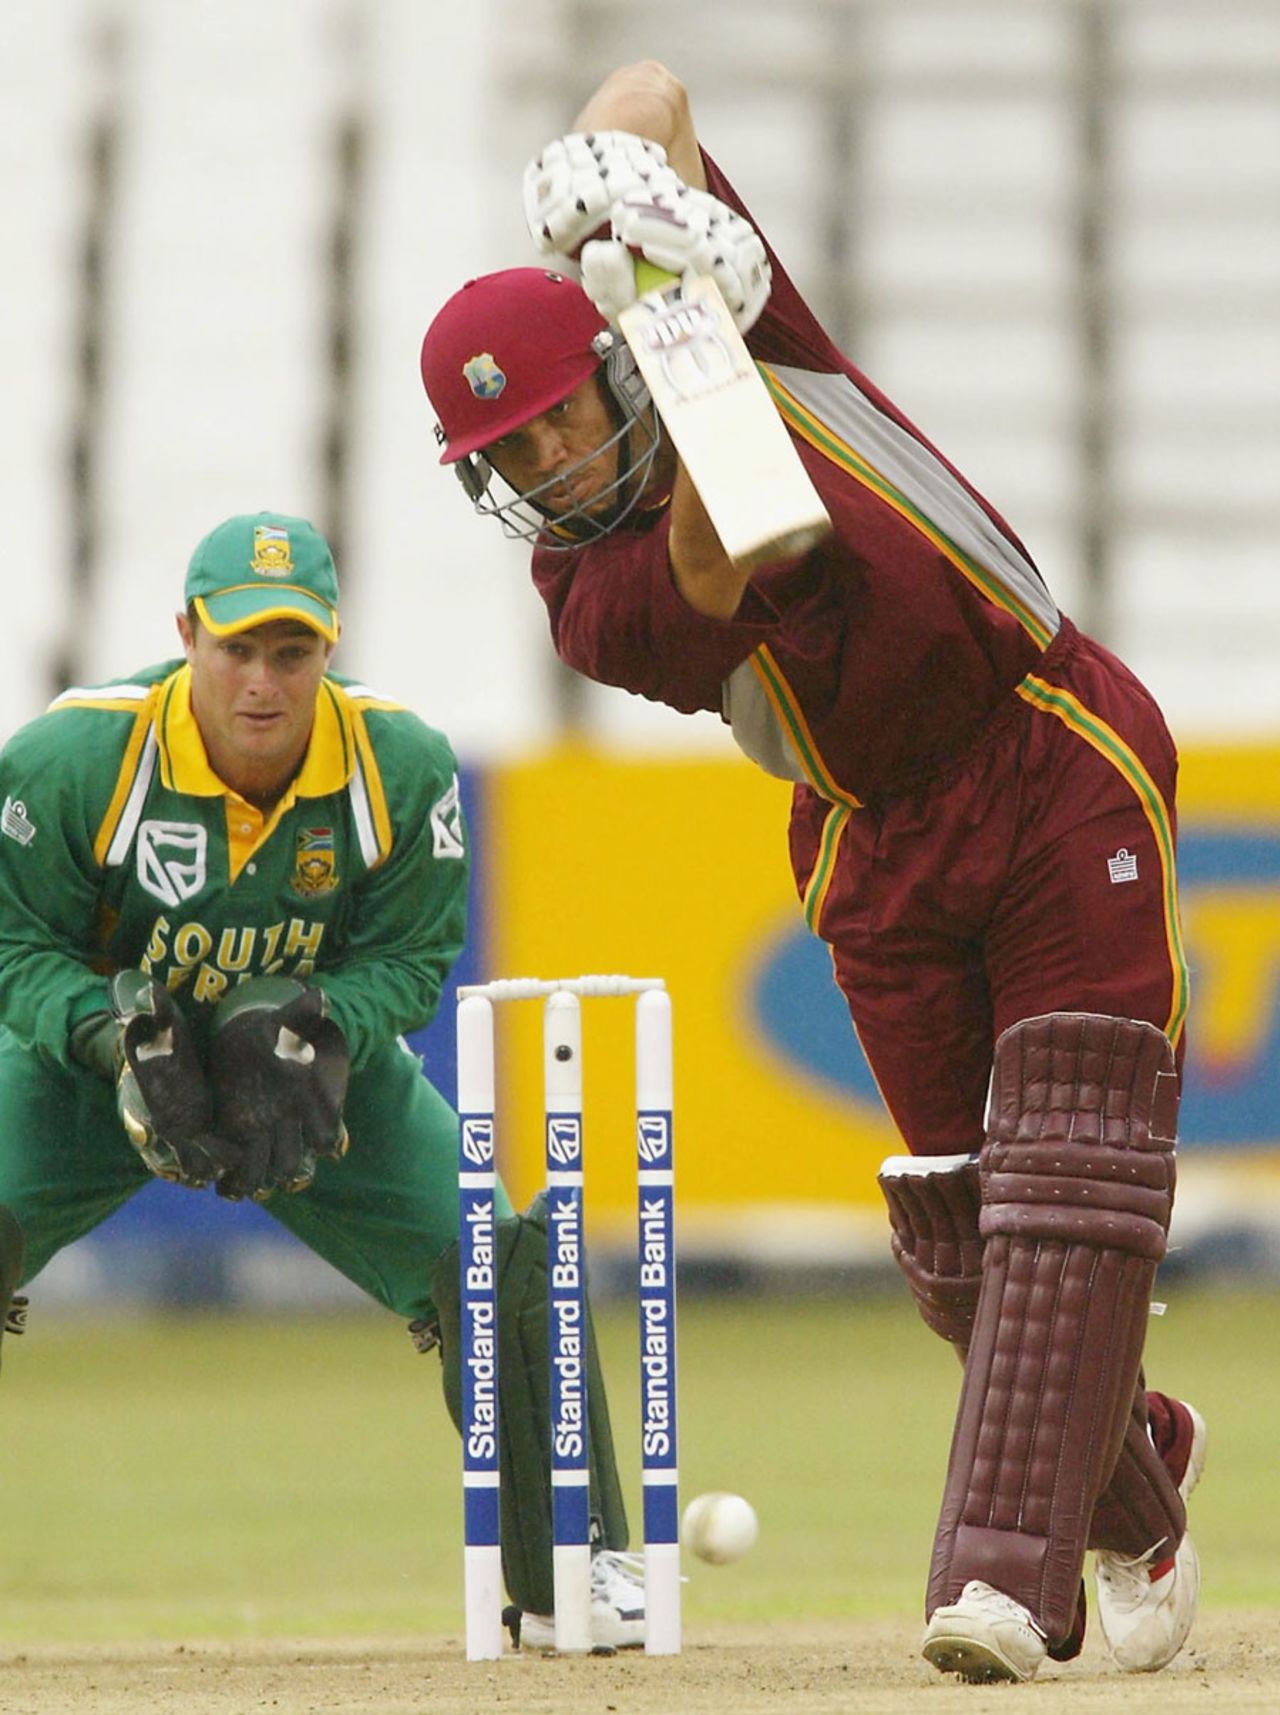 Ricardo Powell batting during his quickfire 49, South Africa v West Indies, 5th ODI, Johannesburg, February 4, 2004